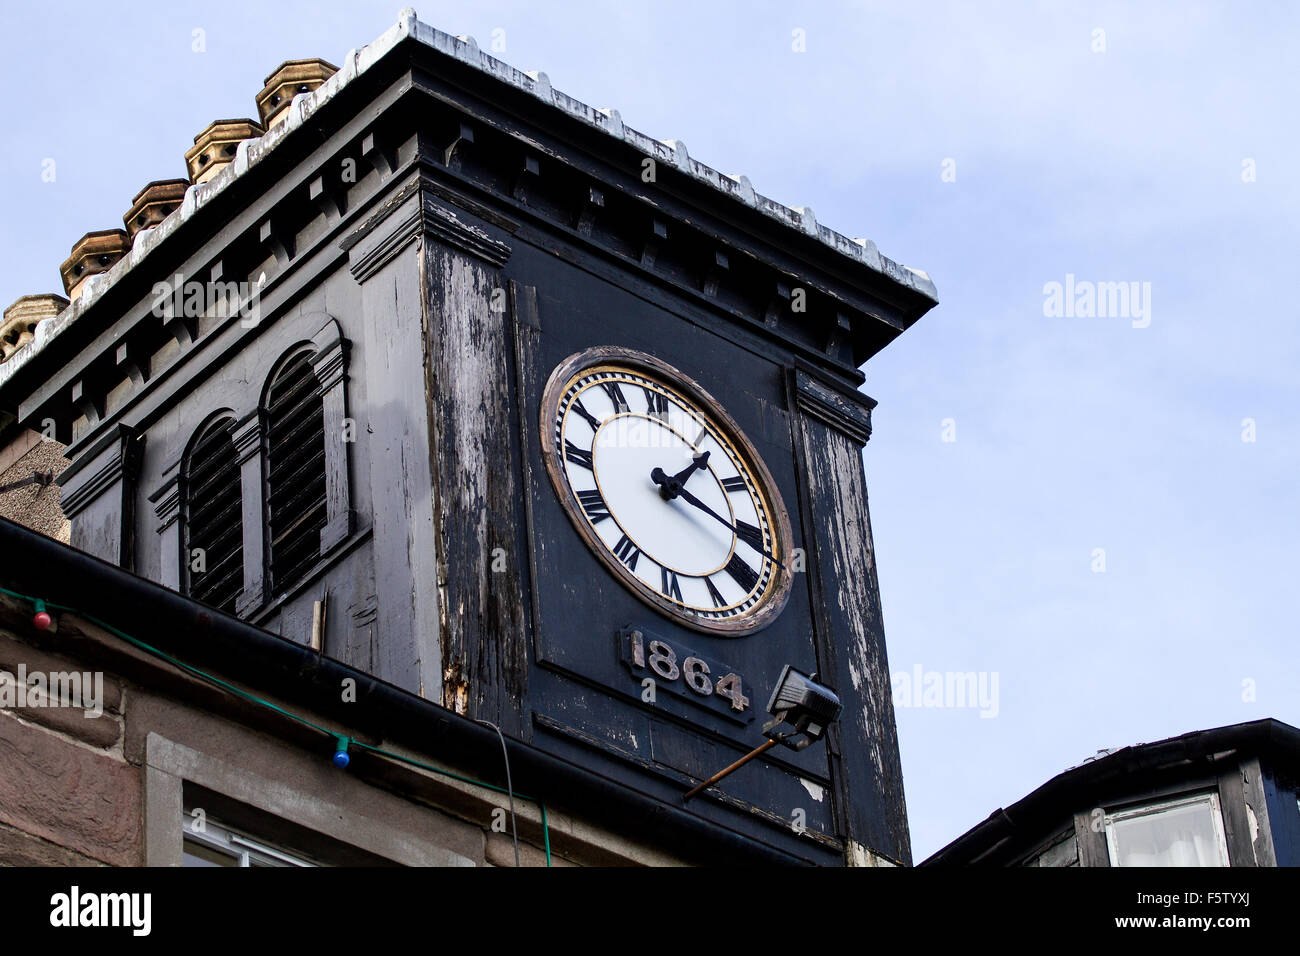 The 1864 black clock on top of 'The Globe' pub which was established around 1823 in Dundee, UK Stock Photo